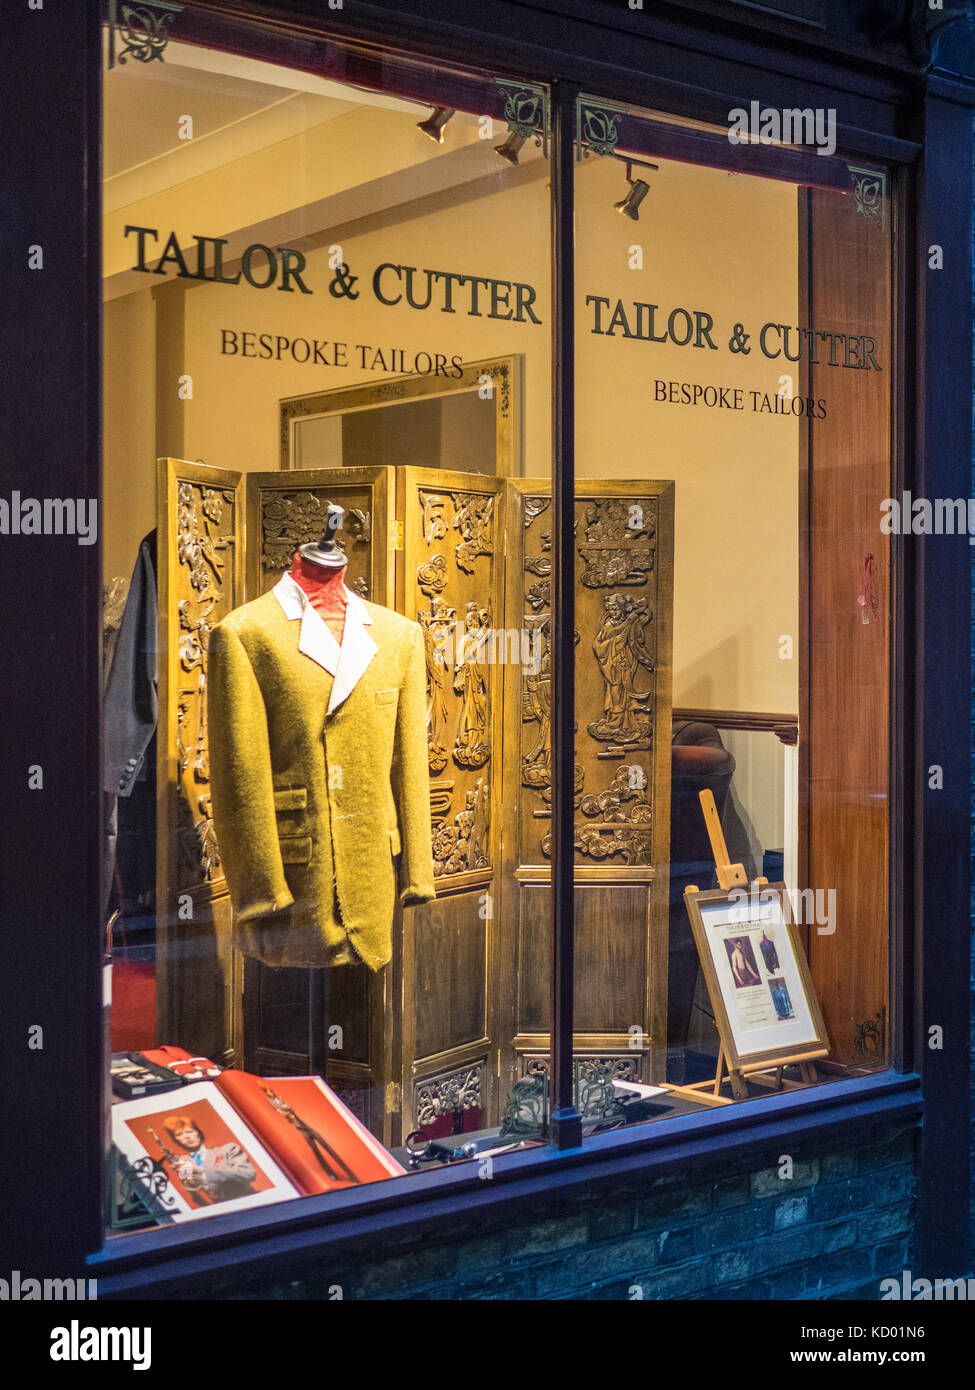 Tailor and Cutter tailors shop in All Saints Passage in historic central Cambridge UK Stock Photo